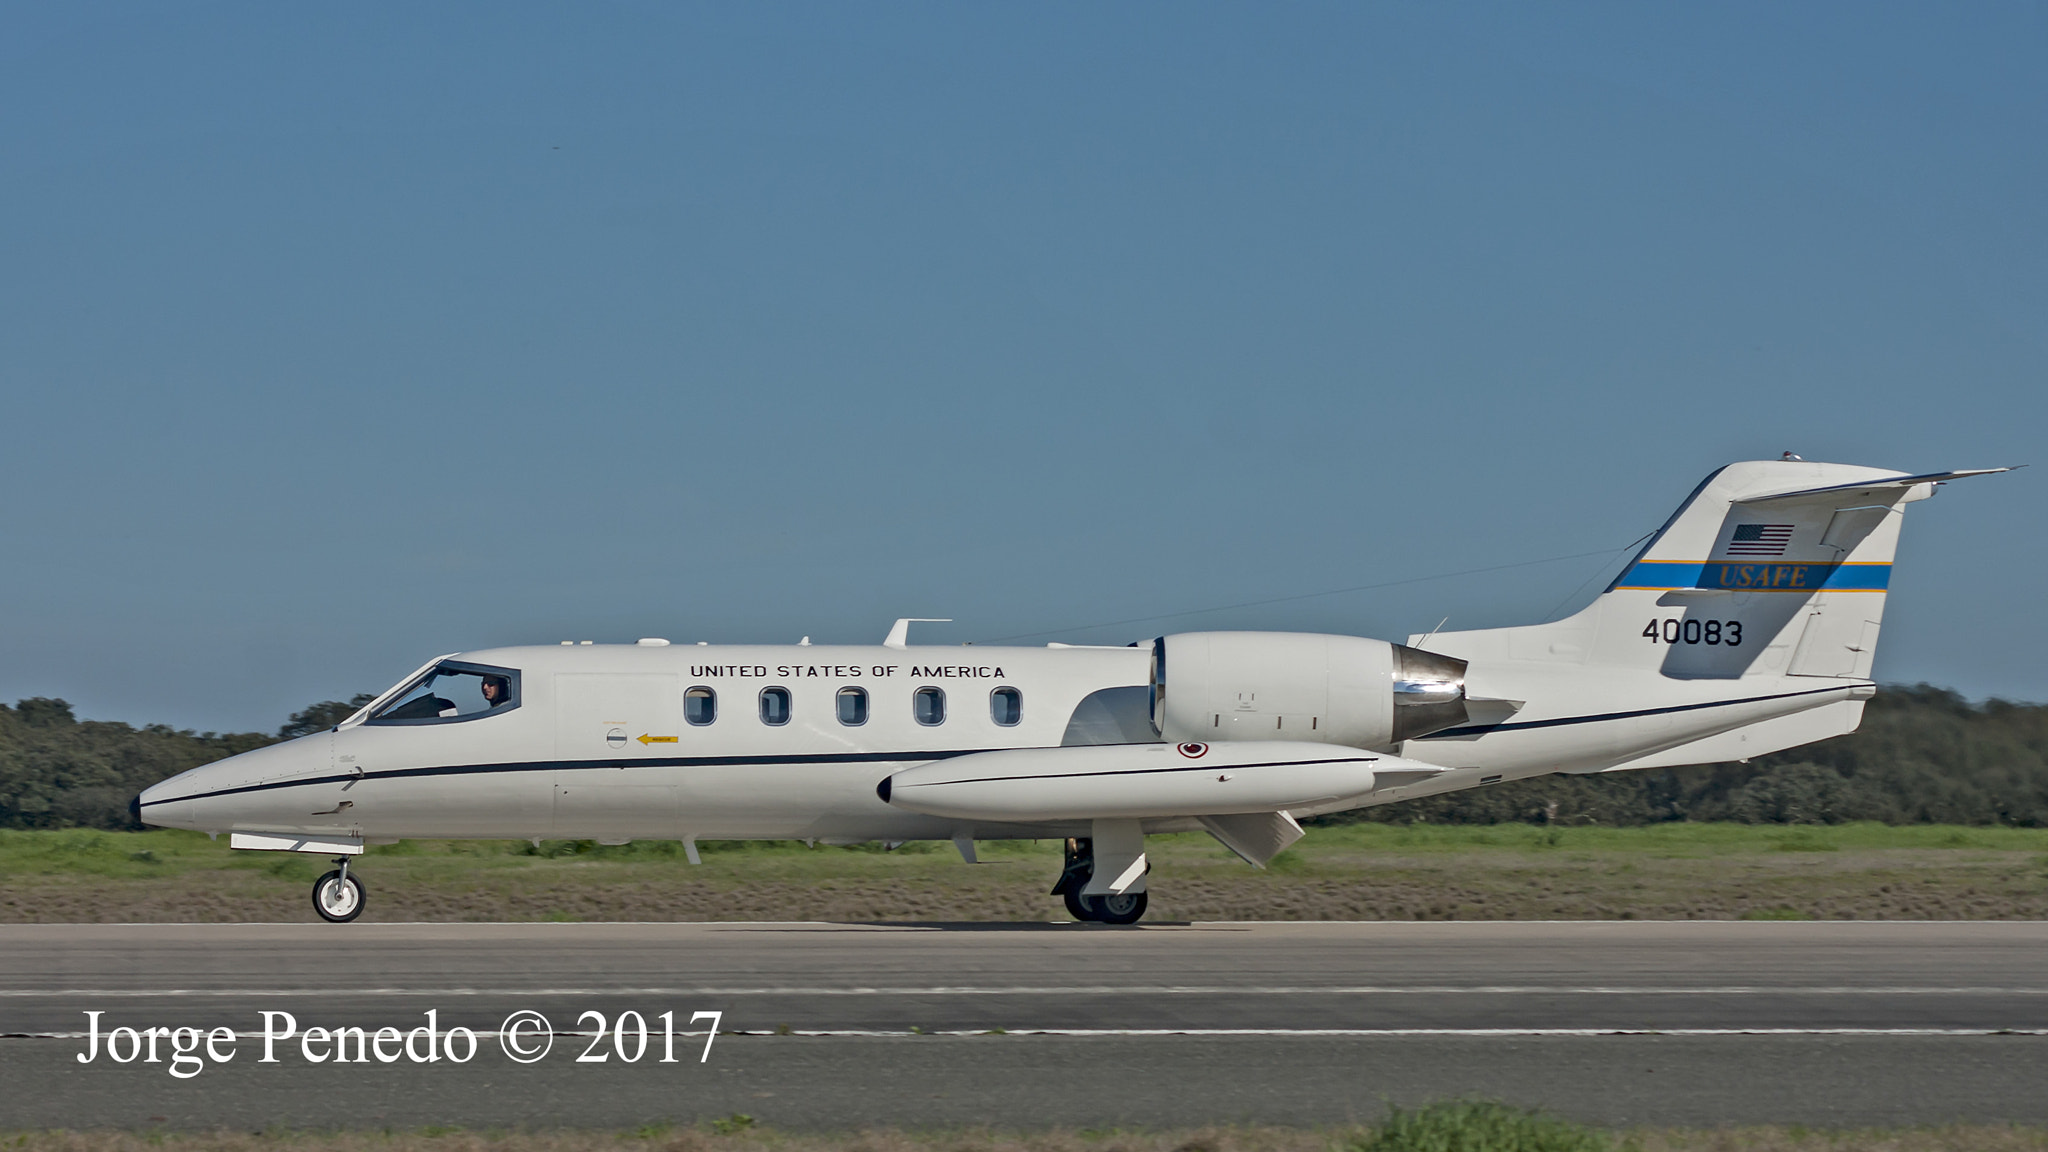 Sony Alpha DSLR-A390 + Sigma 30mm F1.4 EX DC HSM sample photo. Learjet 35 40083 usaf europe photography